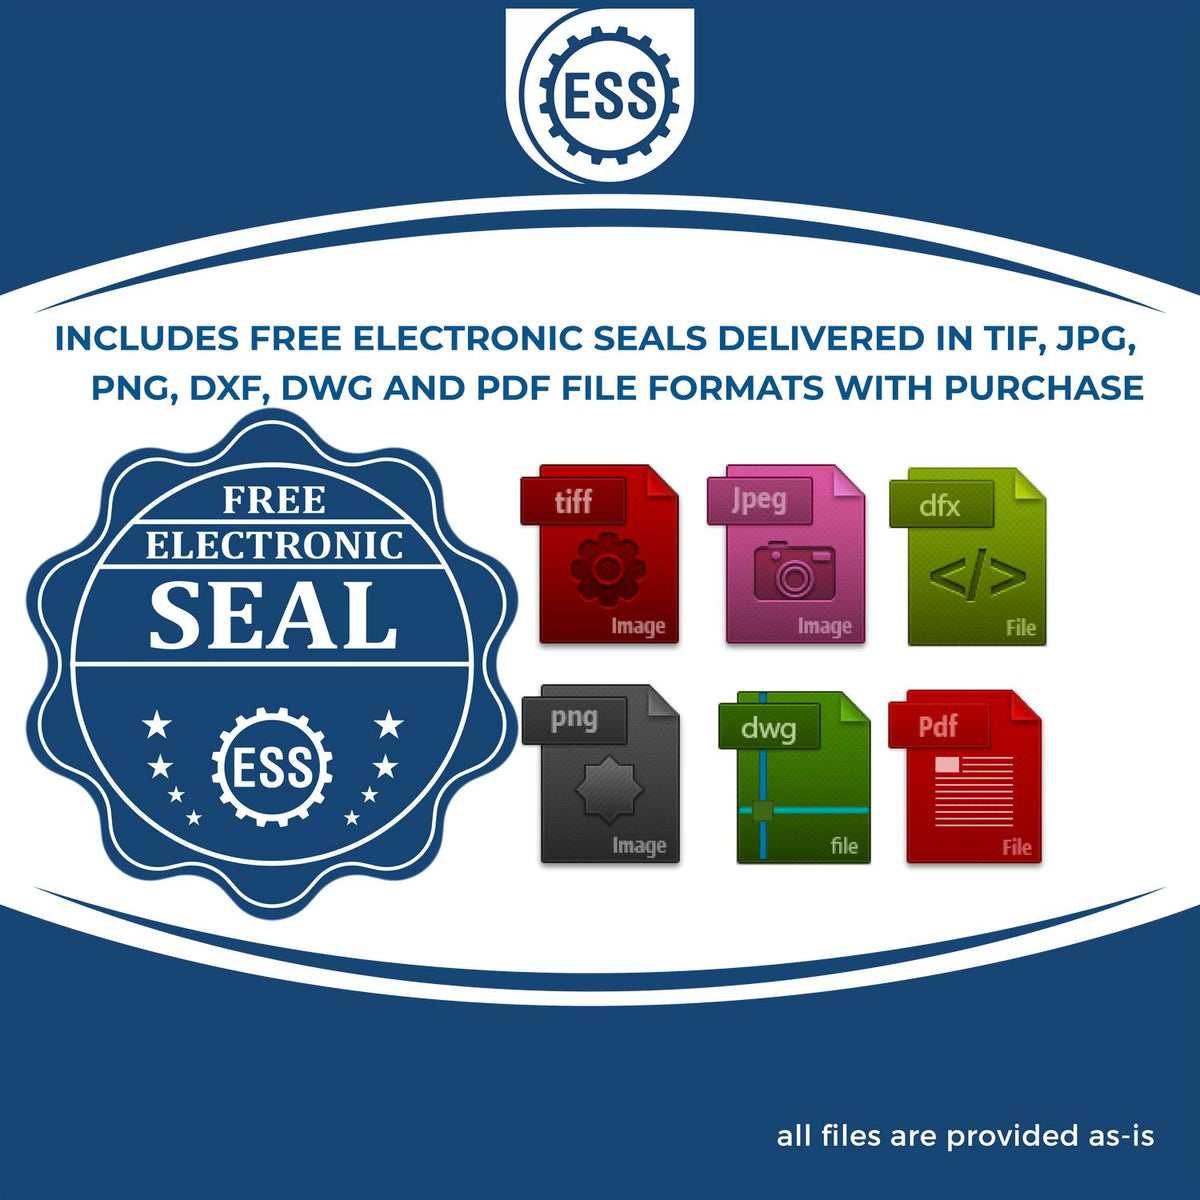 An infographic for the free electronic seal for the Hybrid New Jersey Geologist Seal illustrating the different file type icons such as DXF, DWG, TIF, JPG and PNG.